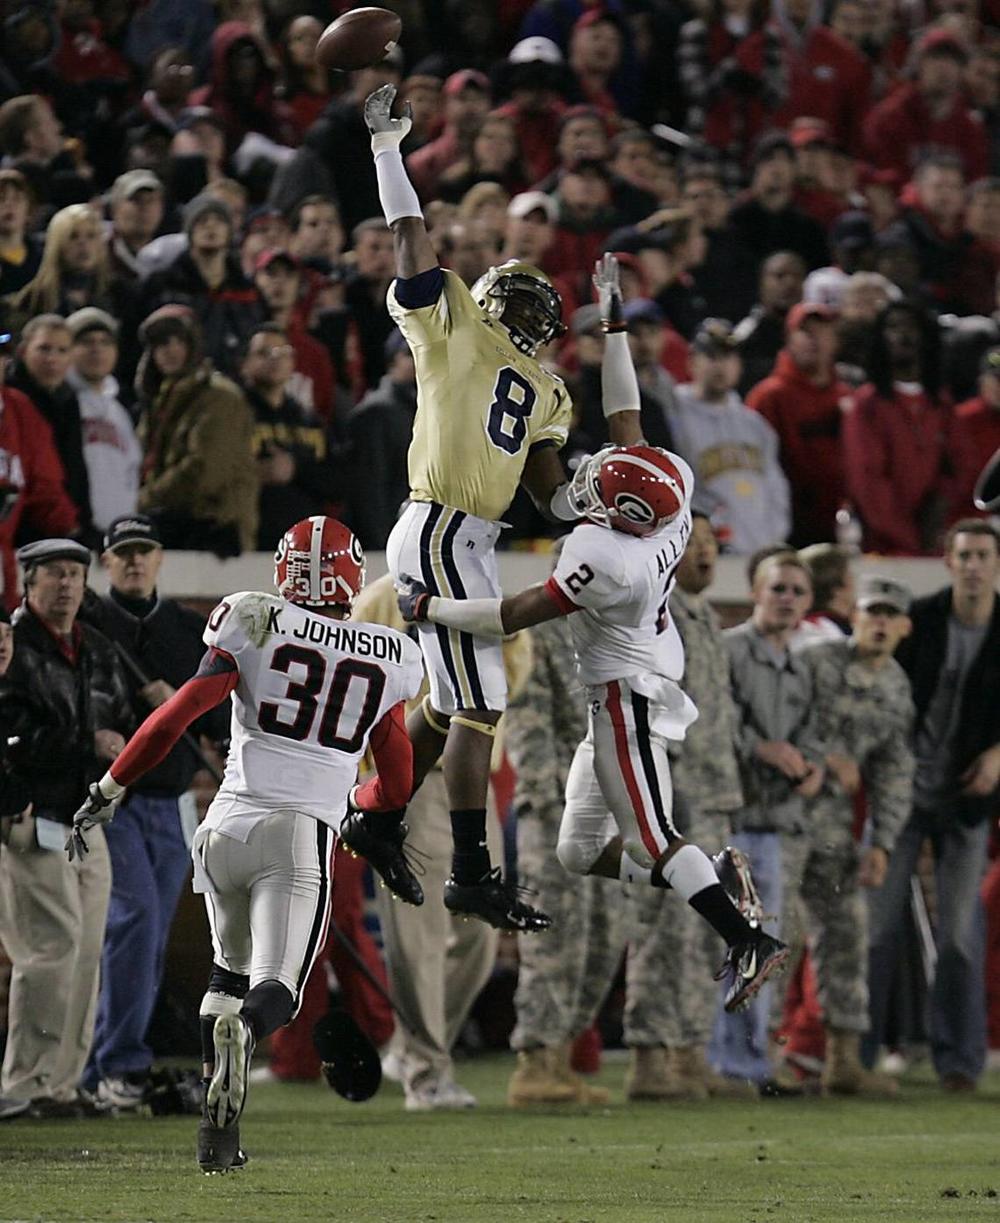 In this 2007 Telegraph file photo, then-Georgia Tech wide receiver Demaryius Thomas leaps for a pass that was over his head against the University of Georgia.